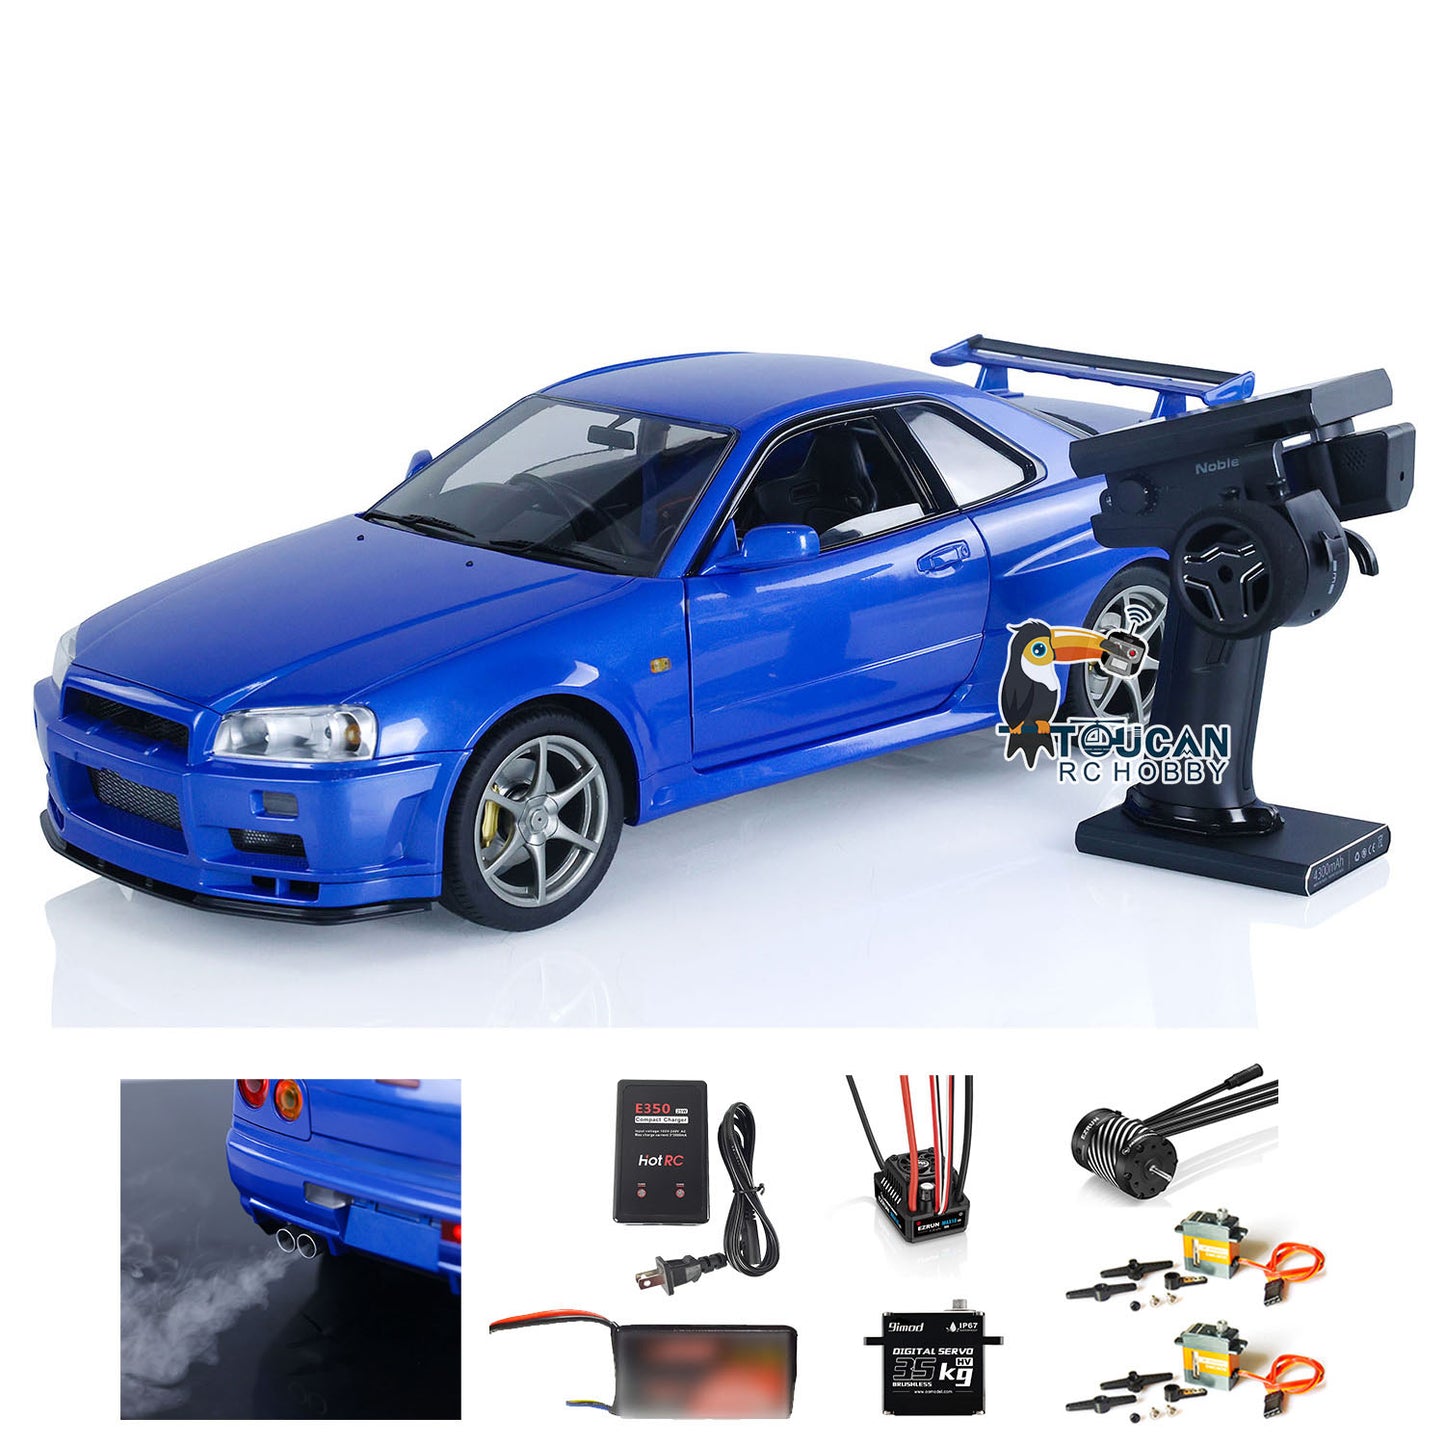 IN STOCK Capo 1/8 Metal 4x4 RC Racing Car Radio Controlled Drift Vehicle Model 4WD R34 RTR High-speed Light Sound GTR-R34